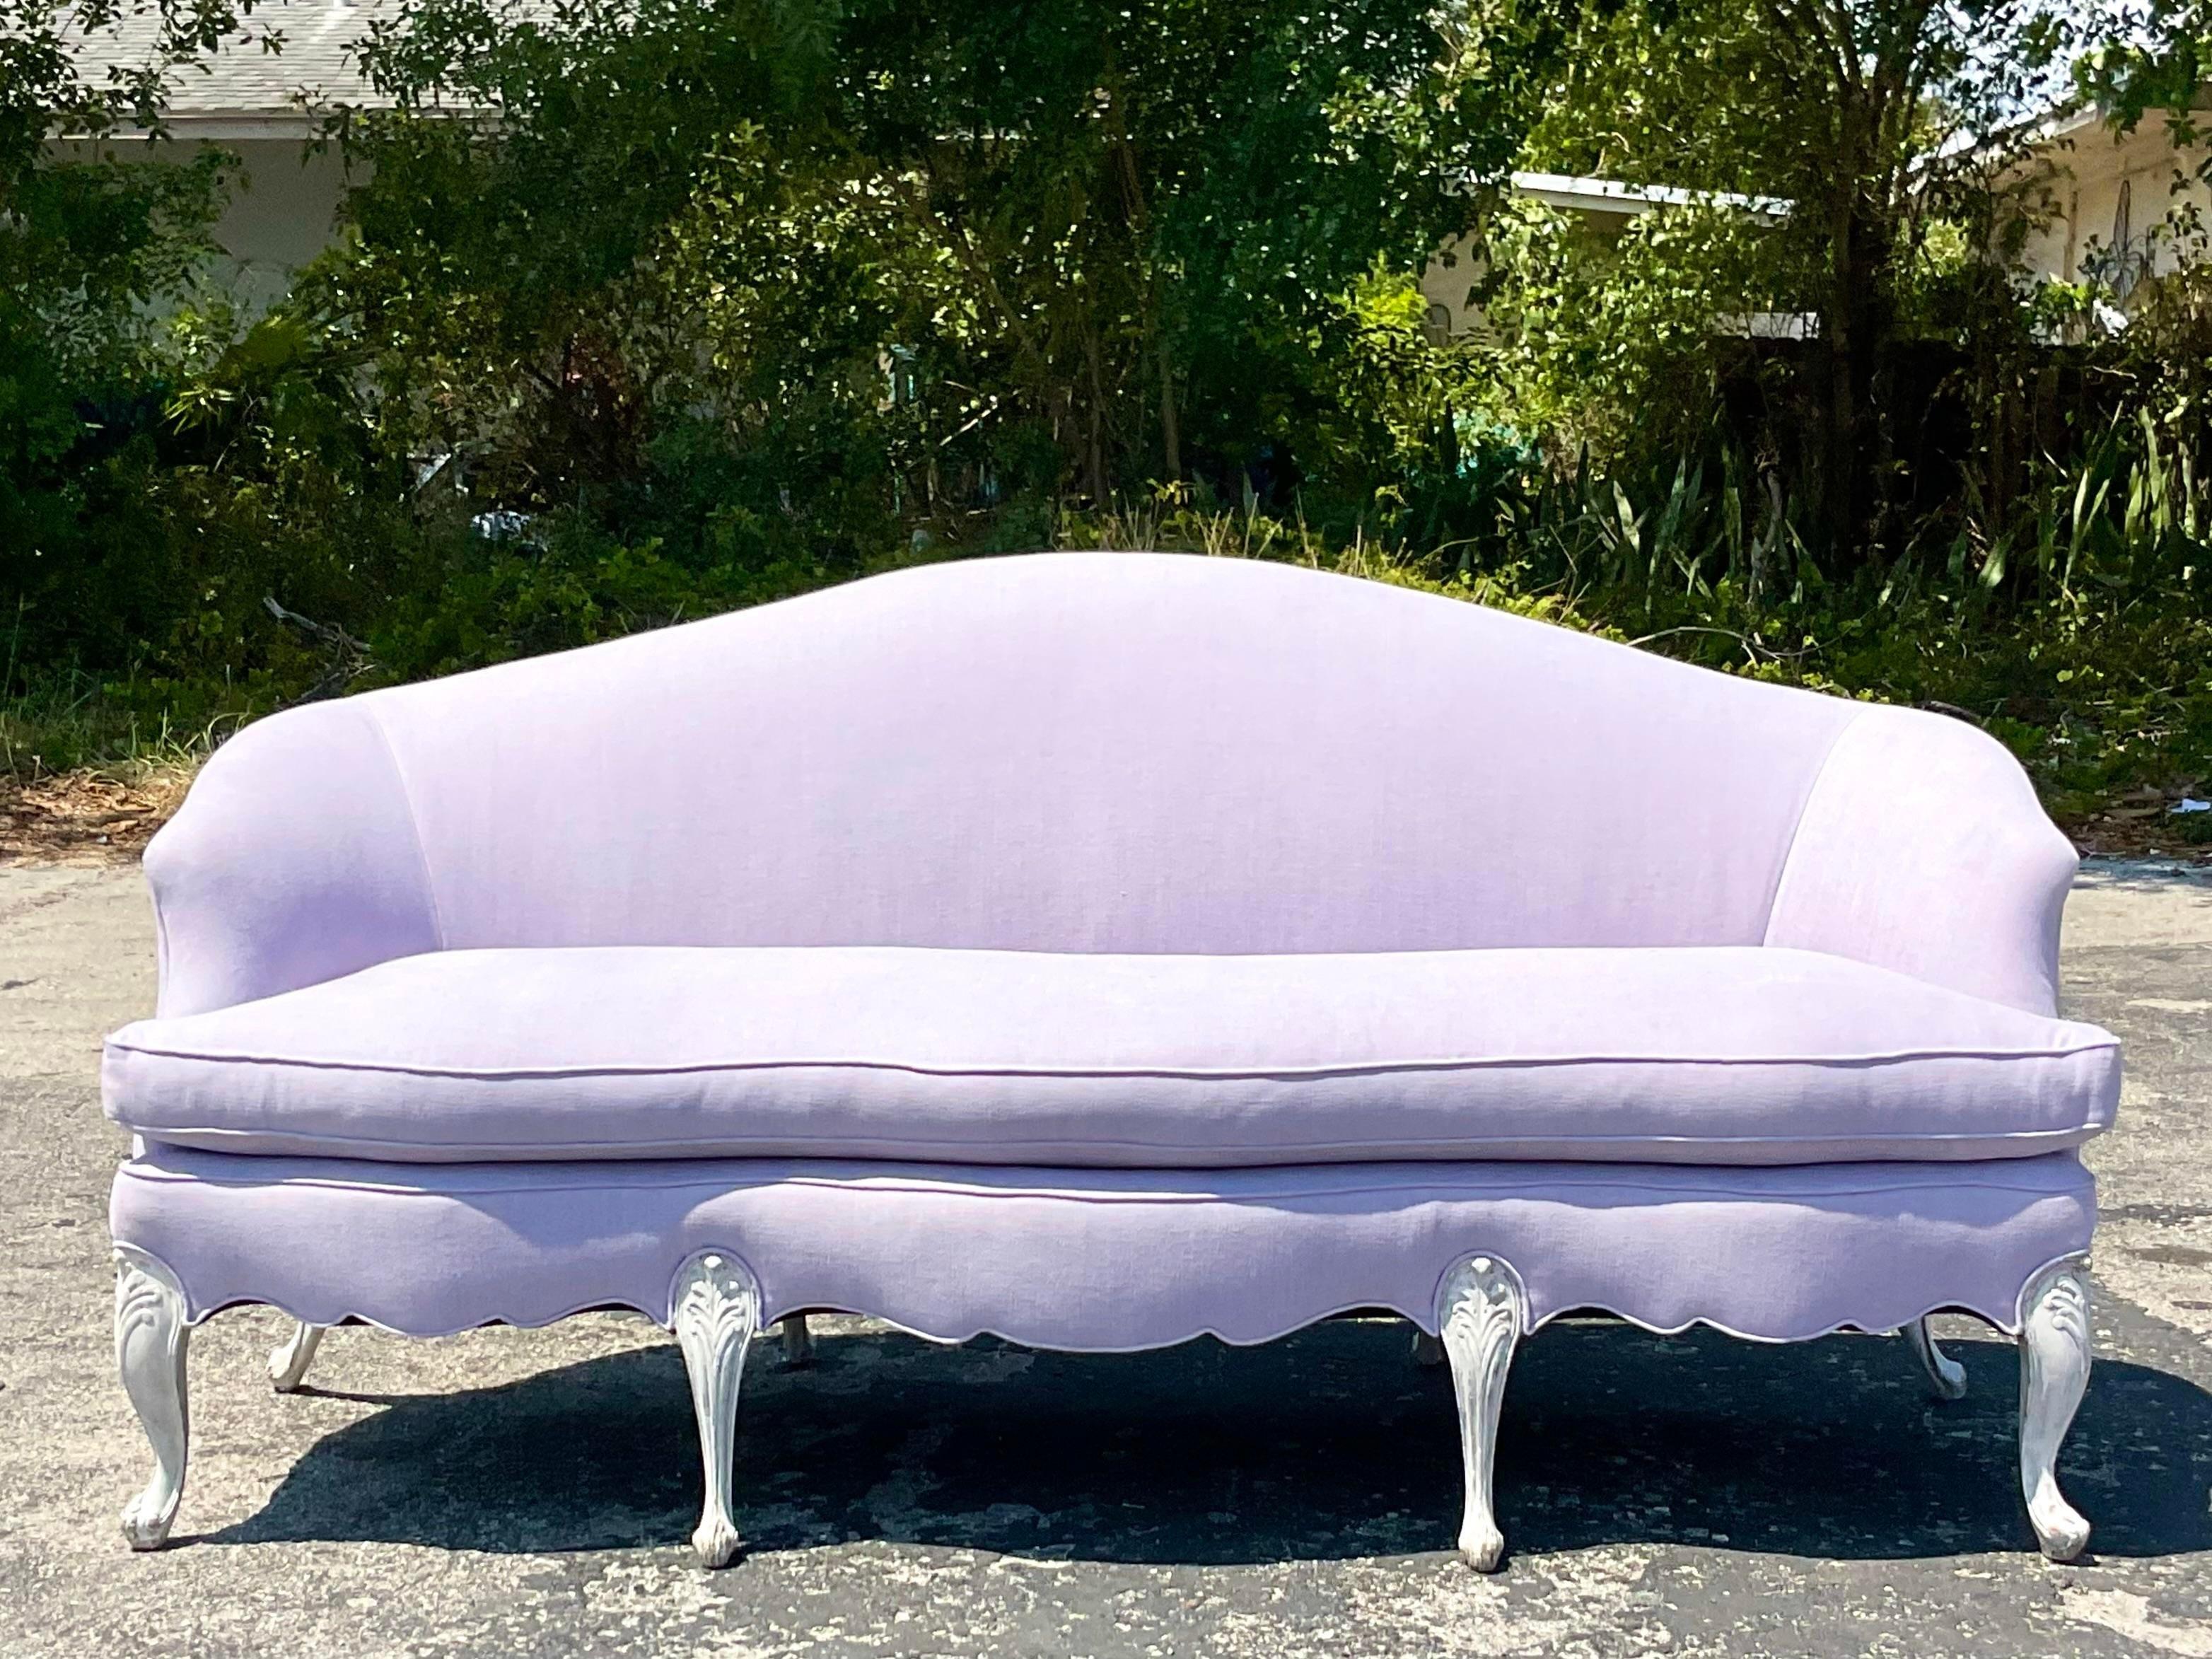 An exceptional vintage Regency sofa. A chic camelback shape that has been recently updated with cerused legs and the most gorgeous pale lavender upholstery. A real showstopper. Acquired from a Palm Beach estate.